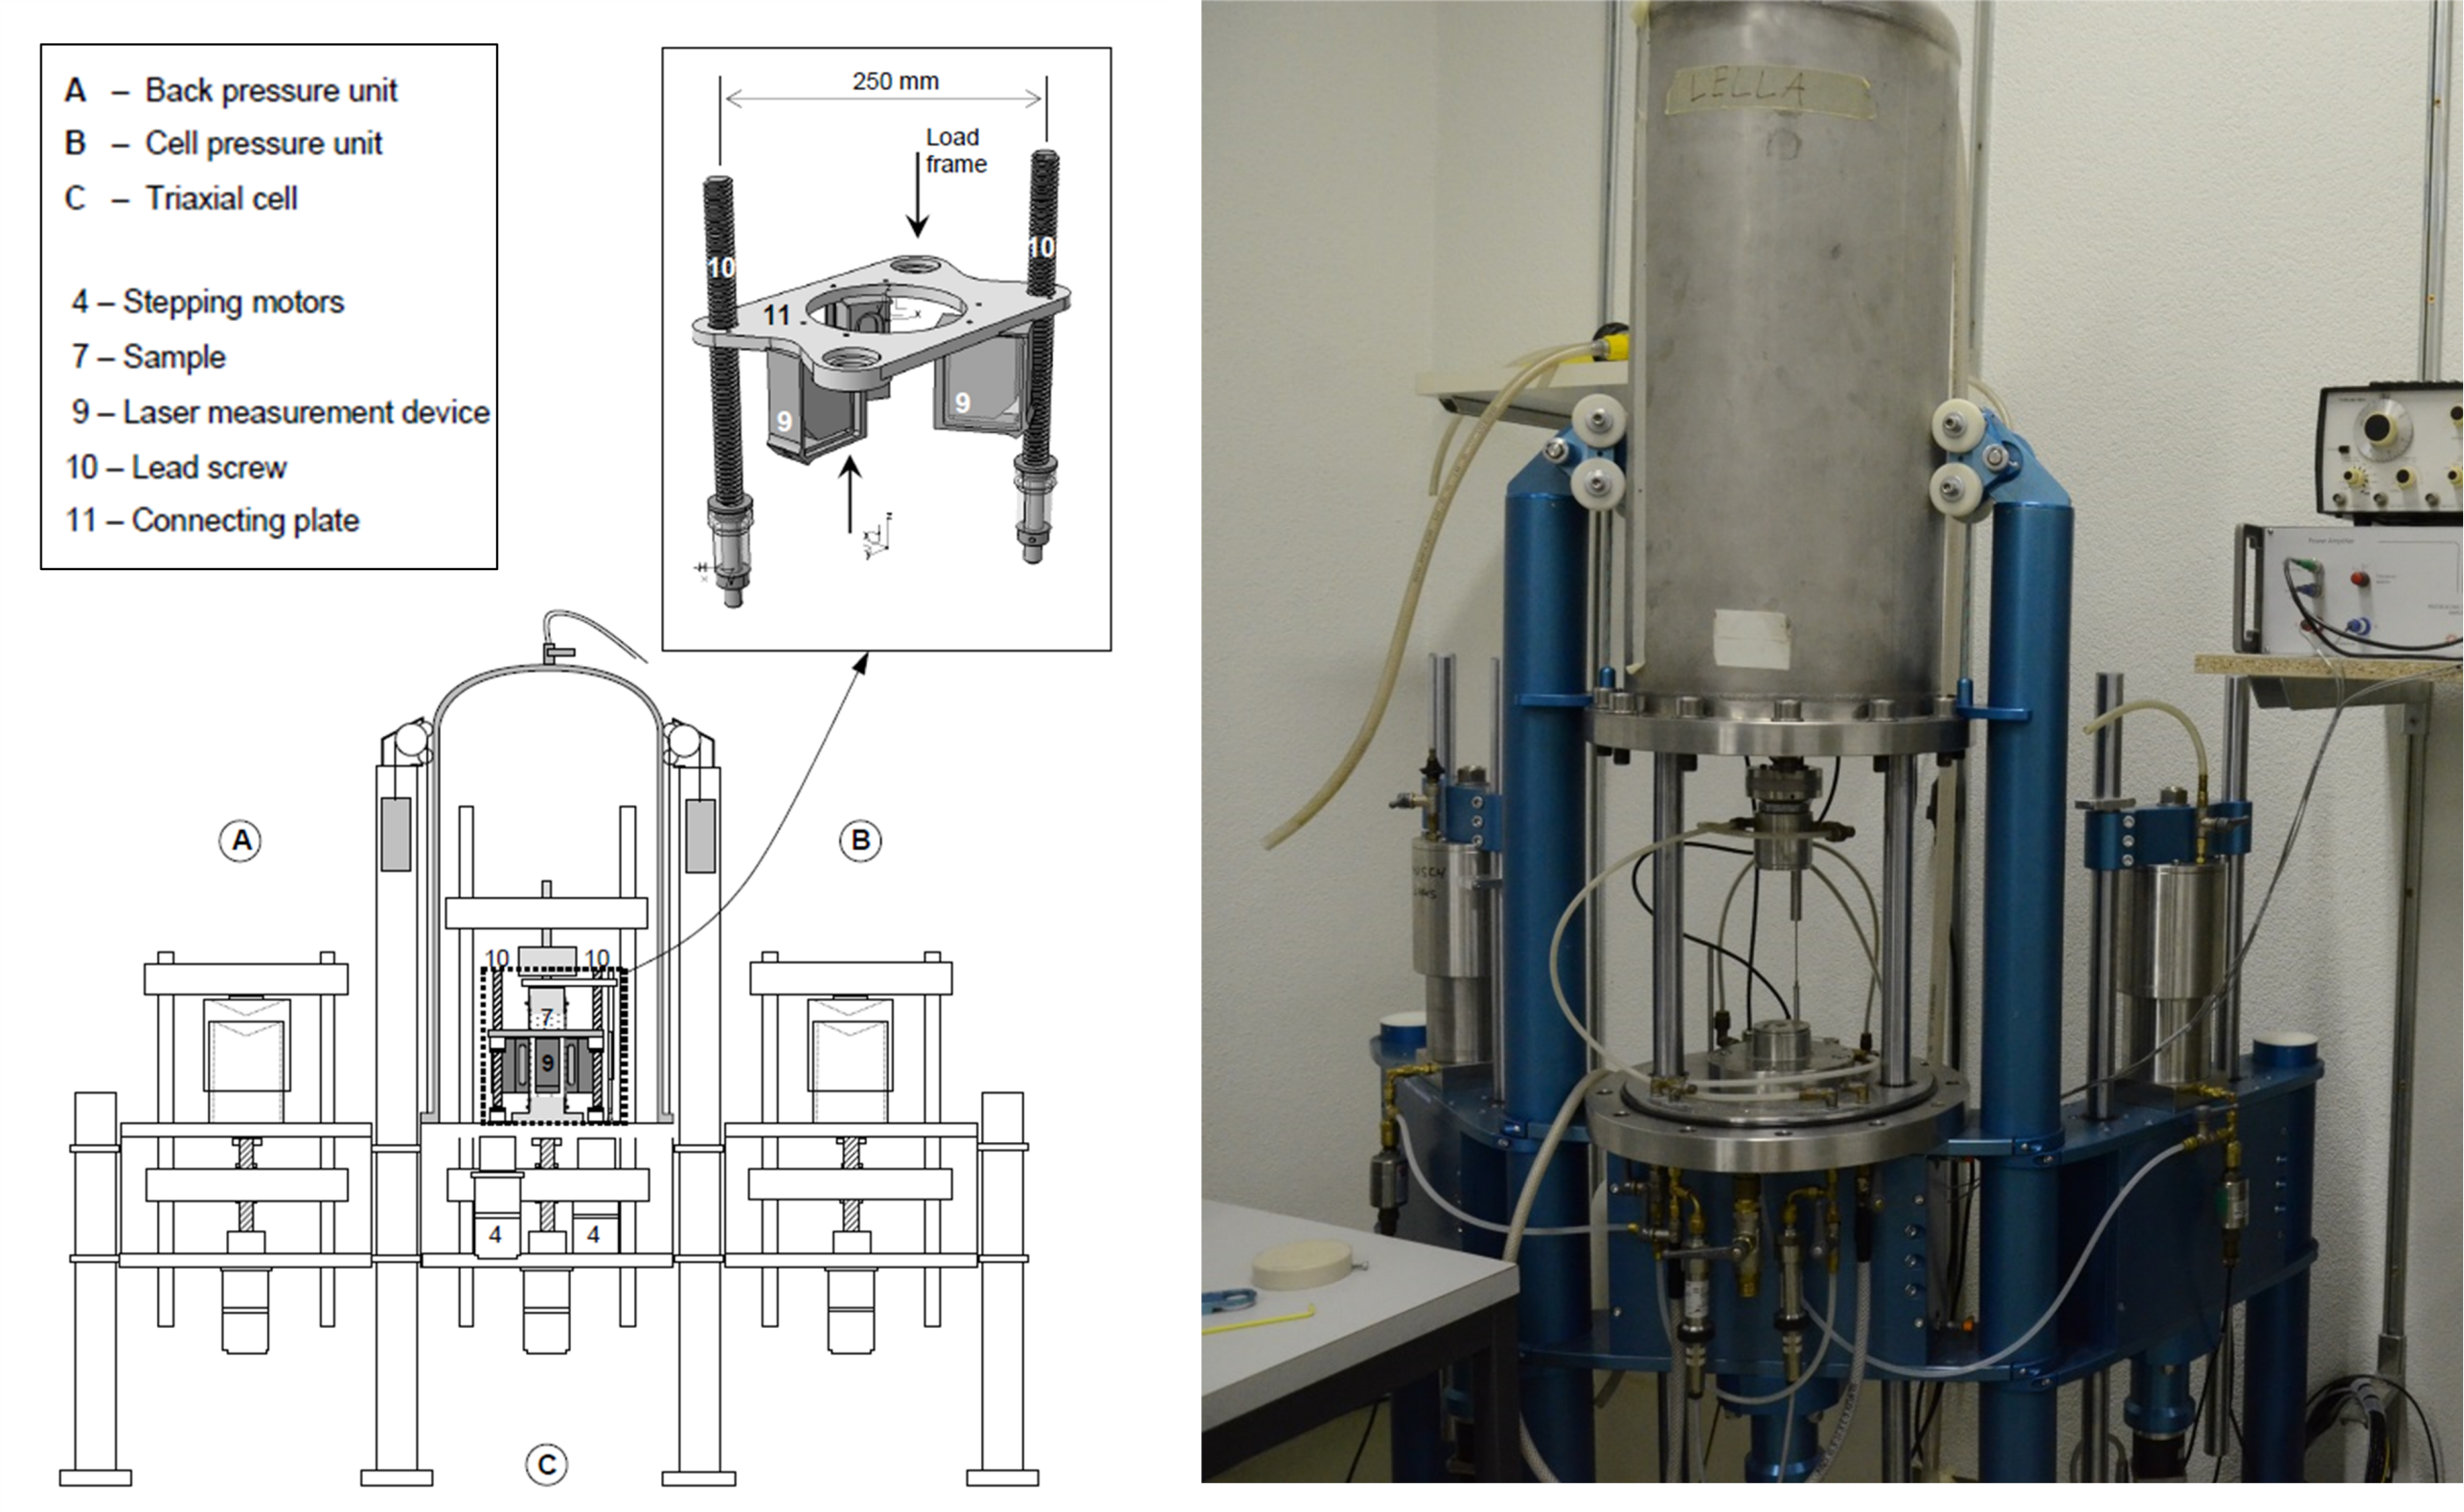 Schematic (Messerklinger 2006) and photo of the in-house developed triaxial testing apparatus.